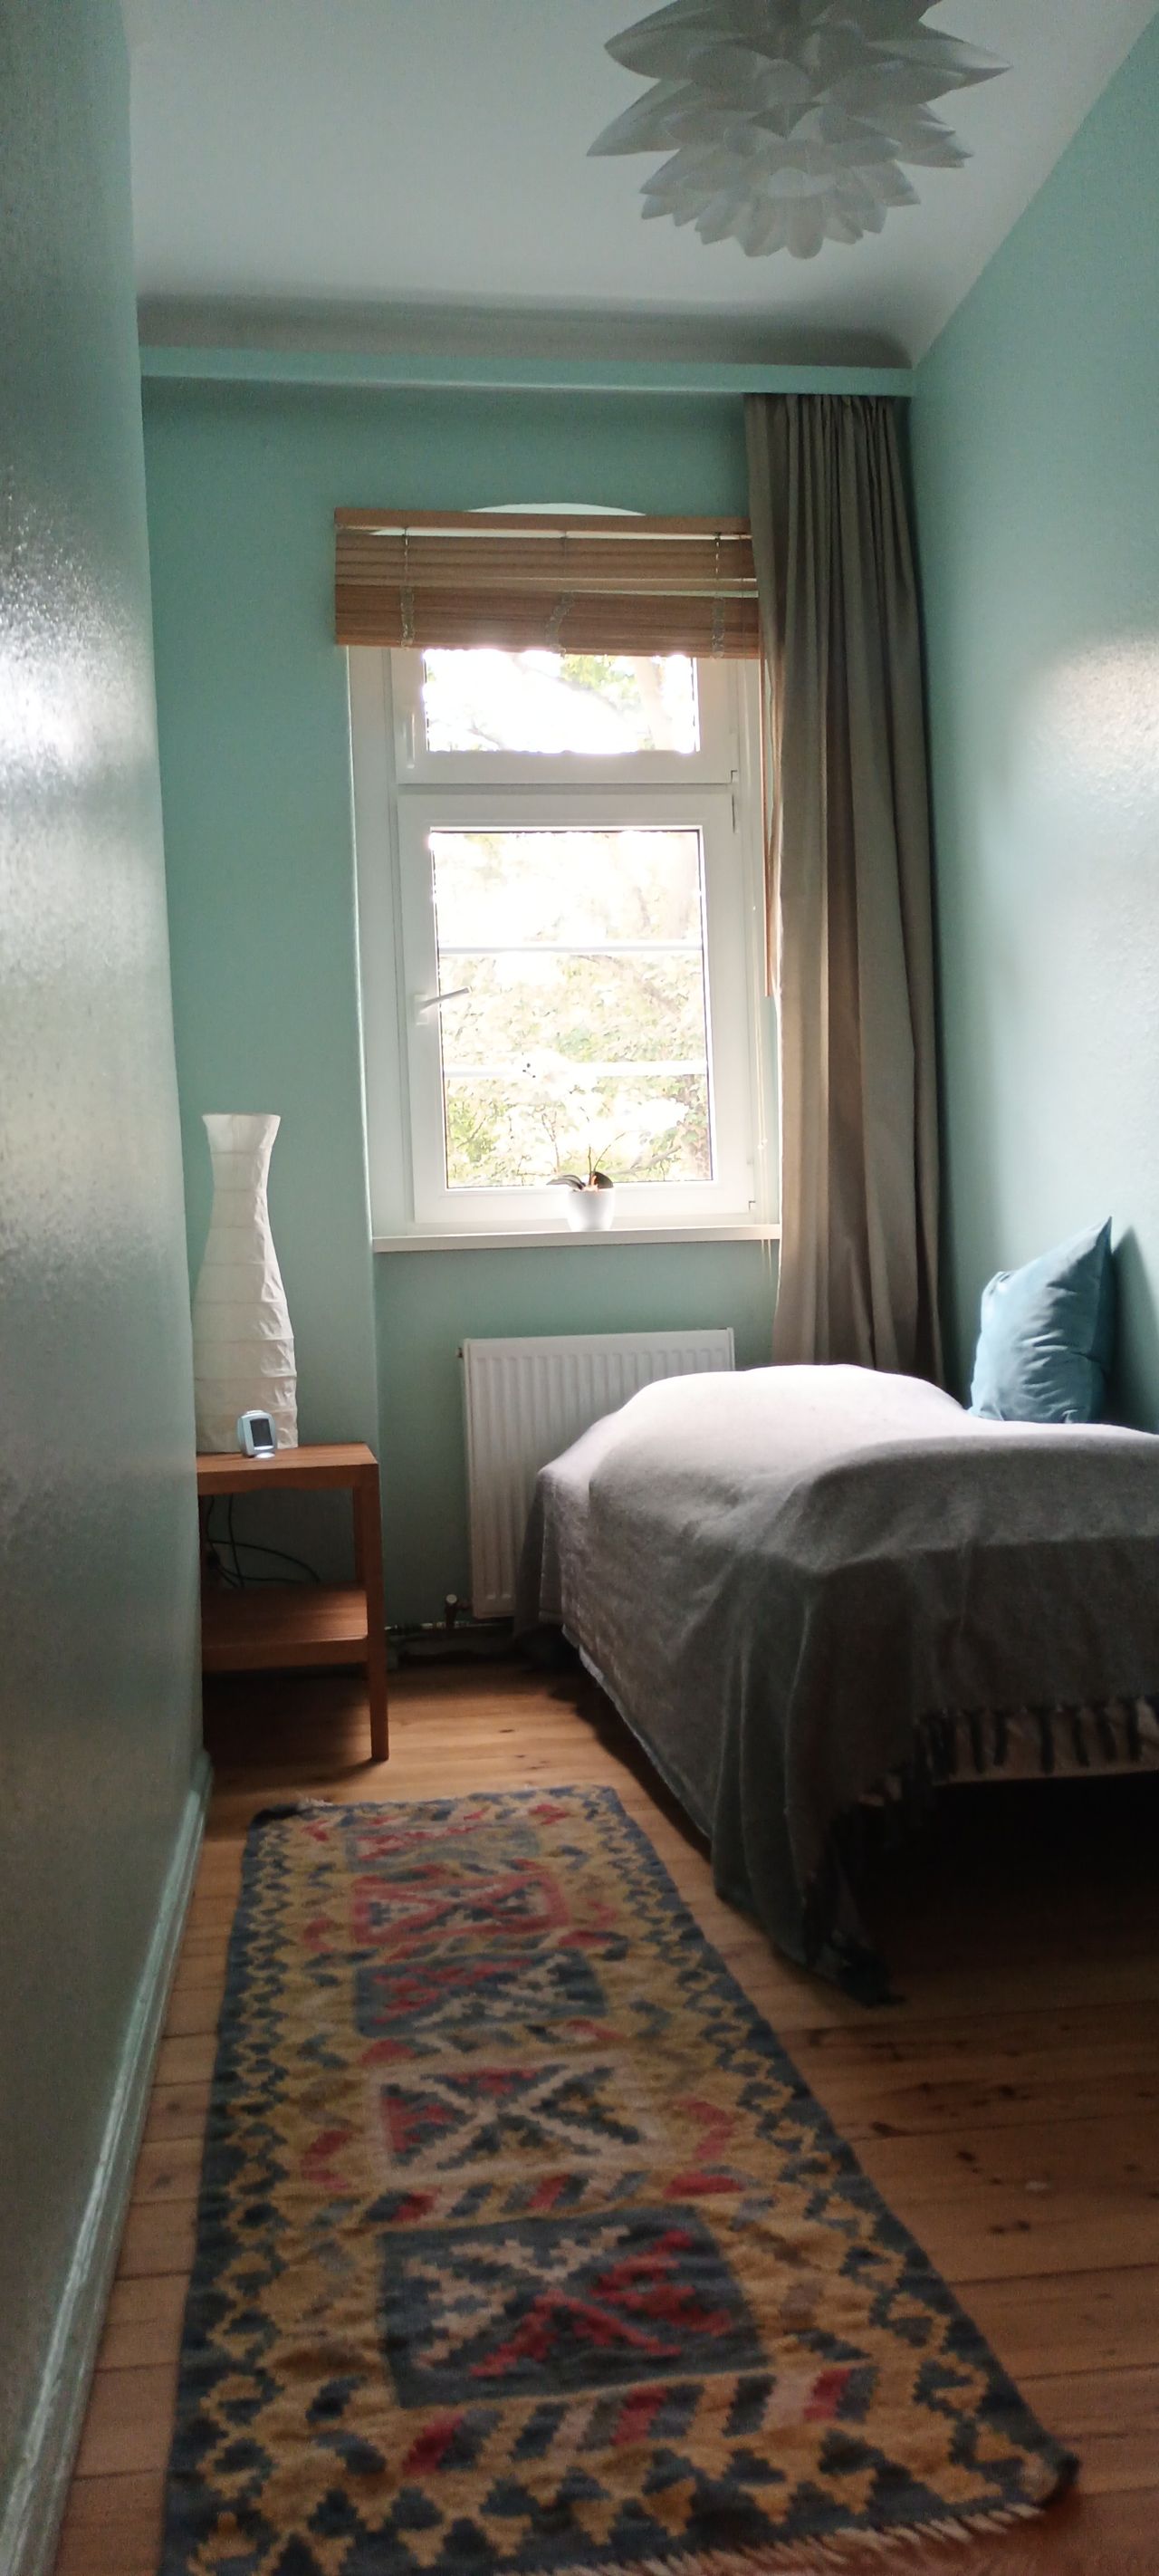 Modern, exclusive 2 rooms apartment with balcony,  central location (eg Messe Berlin)